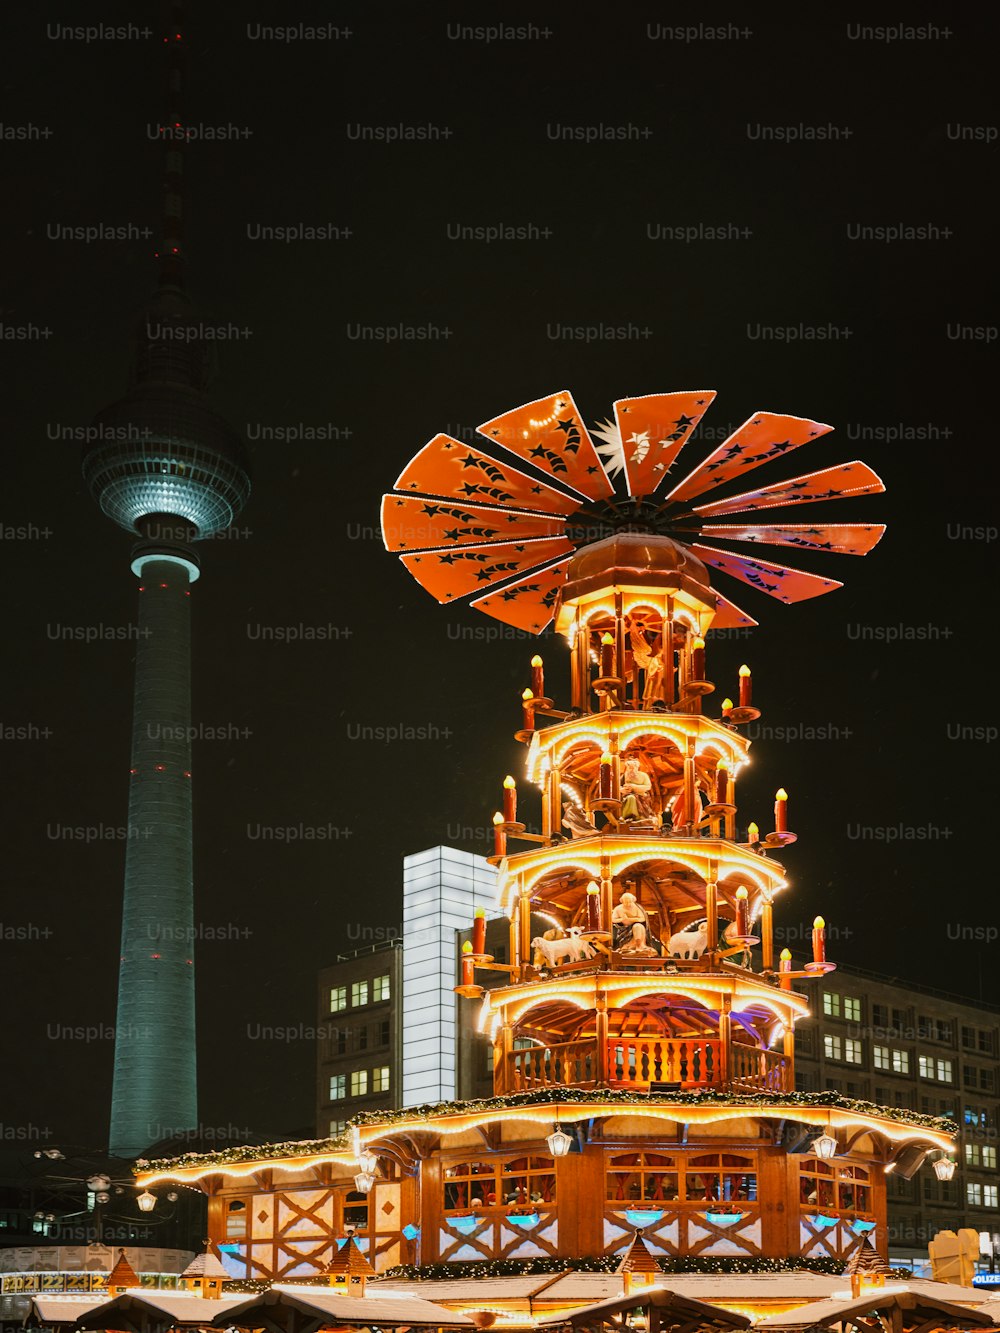 a ferris wheel lit up at night in front of a tall building